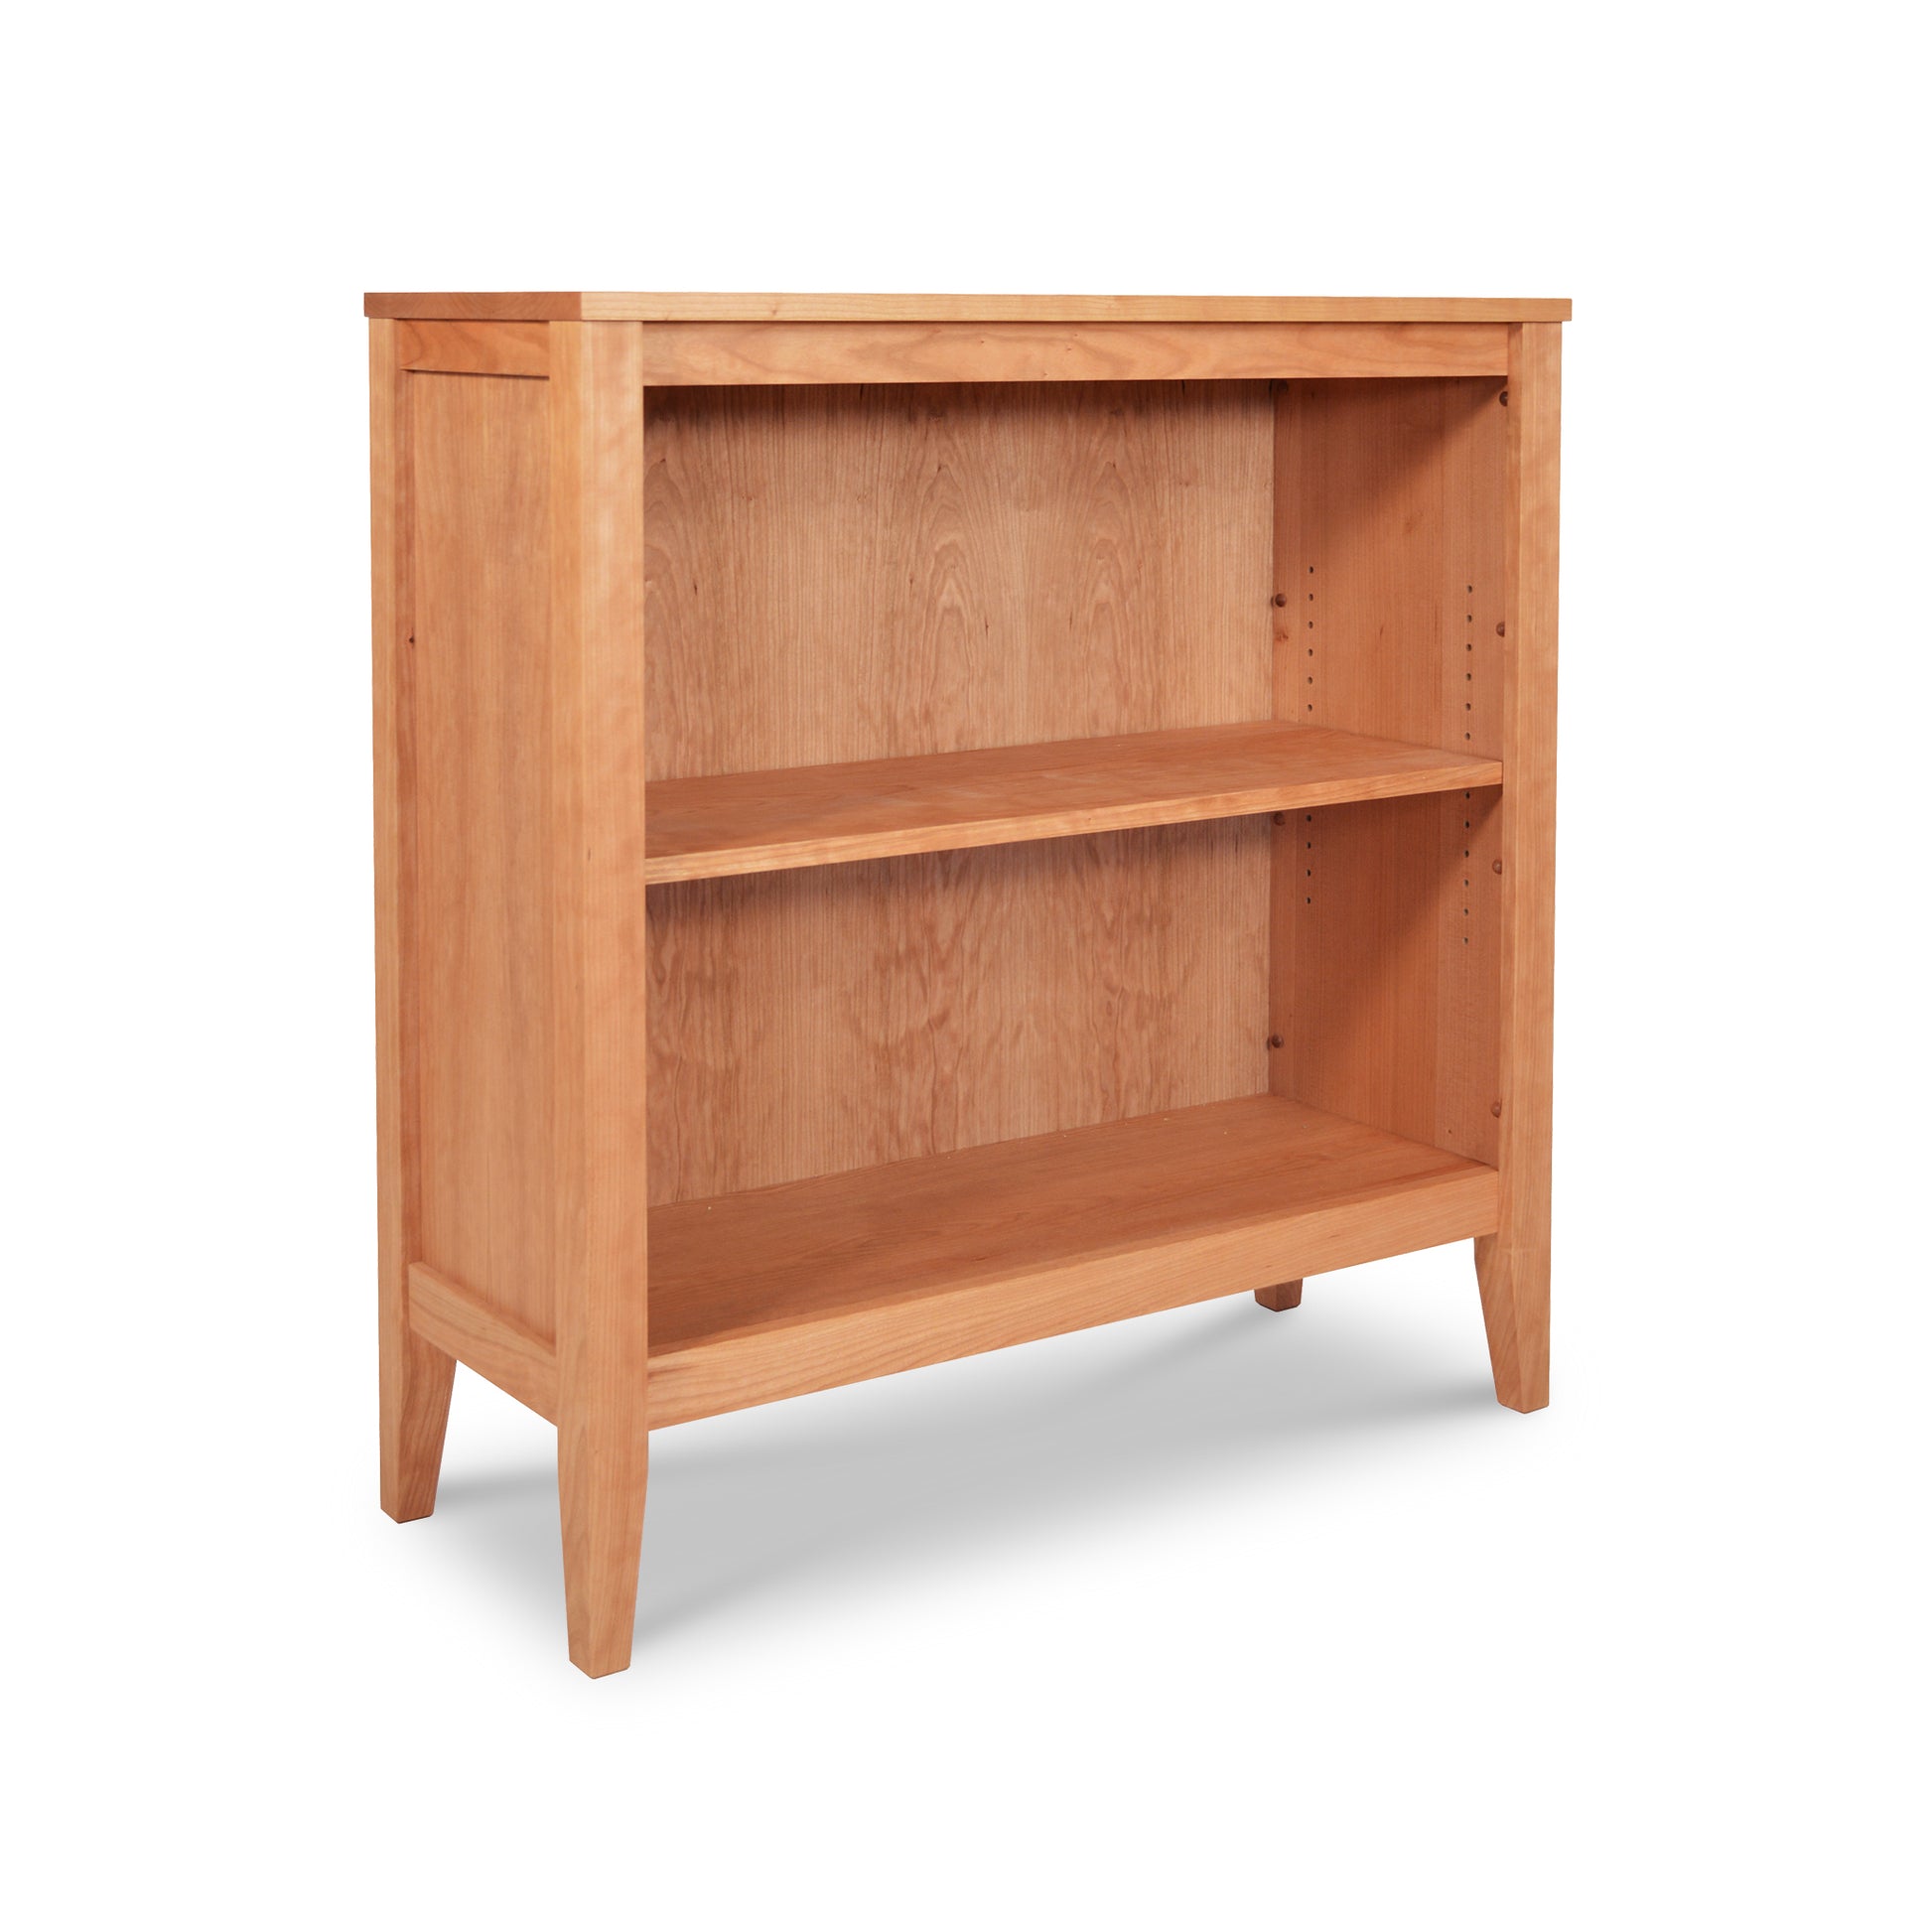 An Andover Modern Bookcase by Maple Corner Woodworks, skilled furniture craftsmen, with a traditional and modern design, set against a white background.